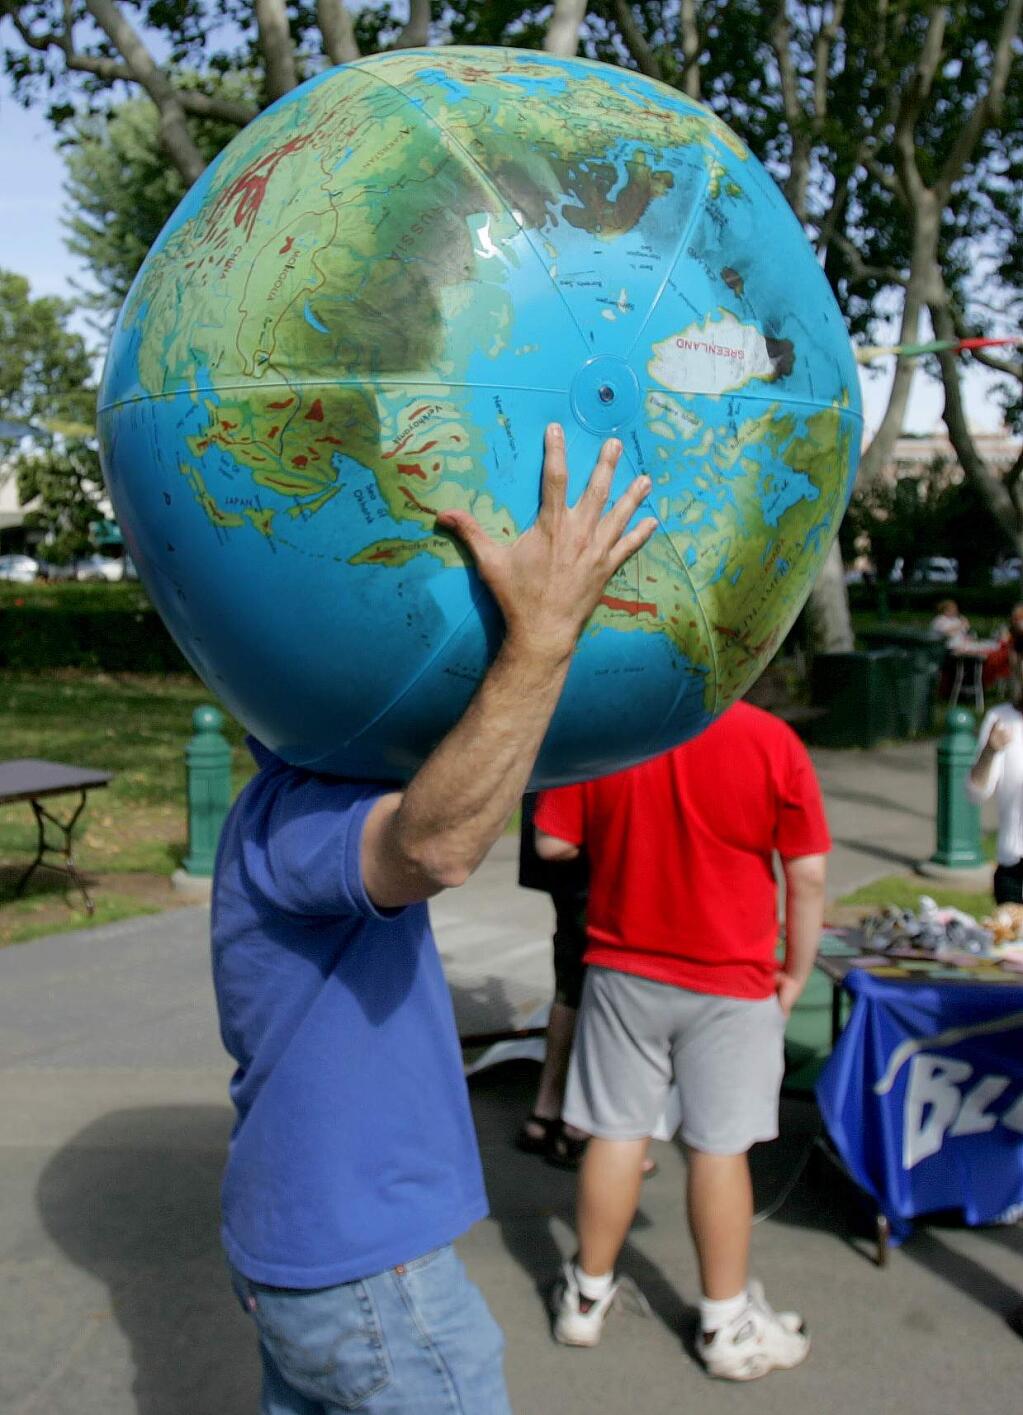 A visitor to Sonoma carries the weight of the world on his shoulders during an previous year's Earth Day event at Sonoma Plaza. (PC File photo)